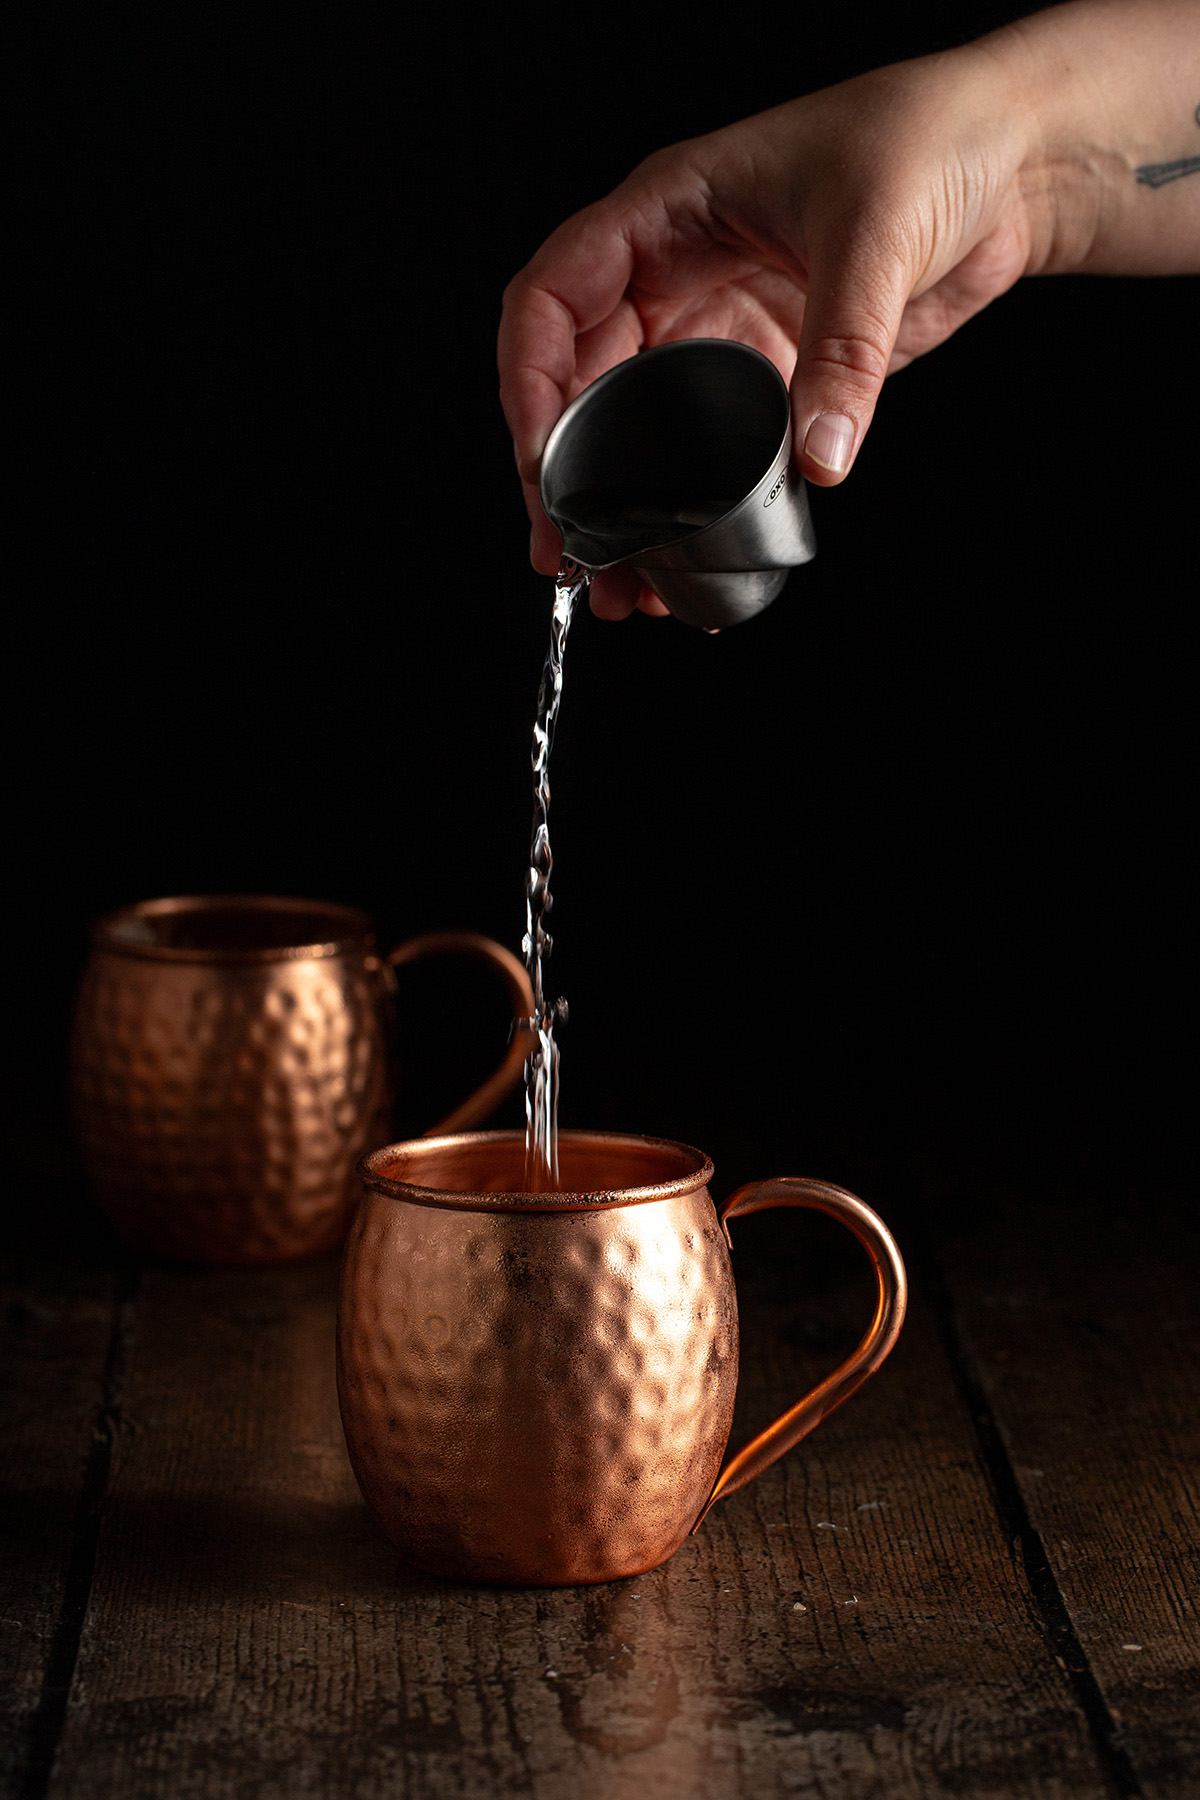 vodka being poured into a copper mug.